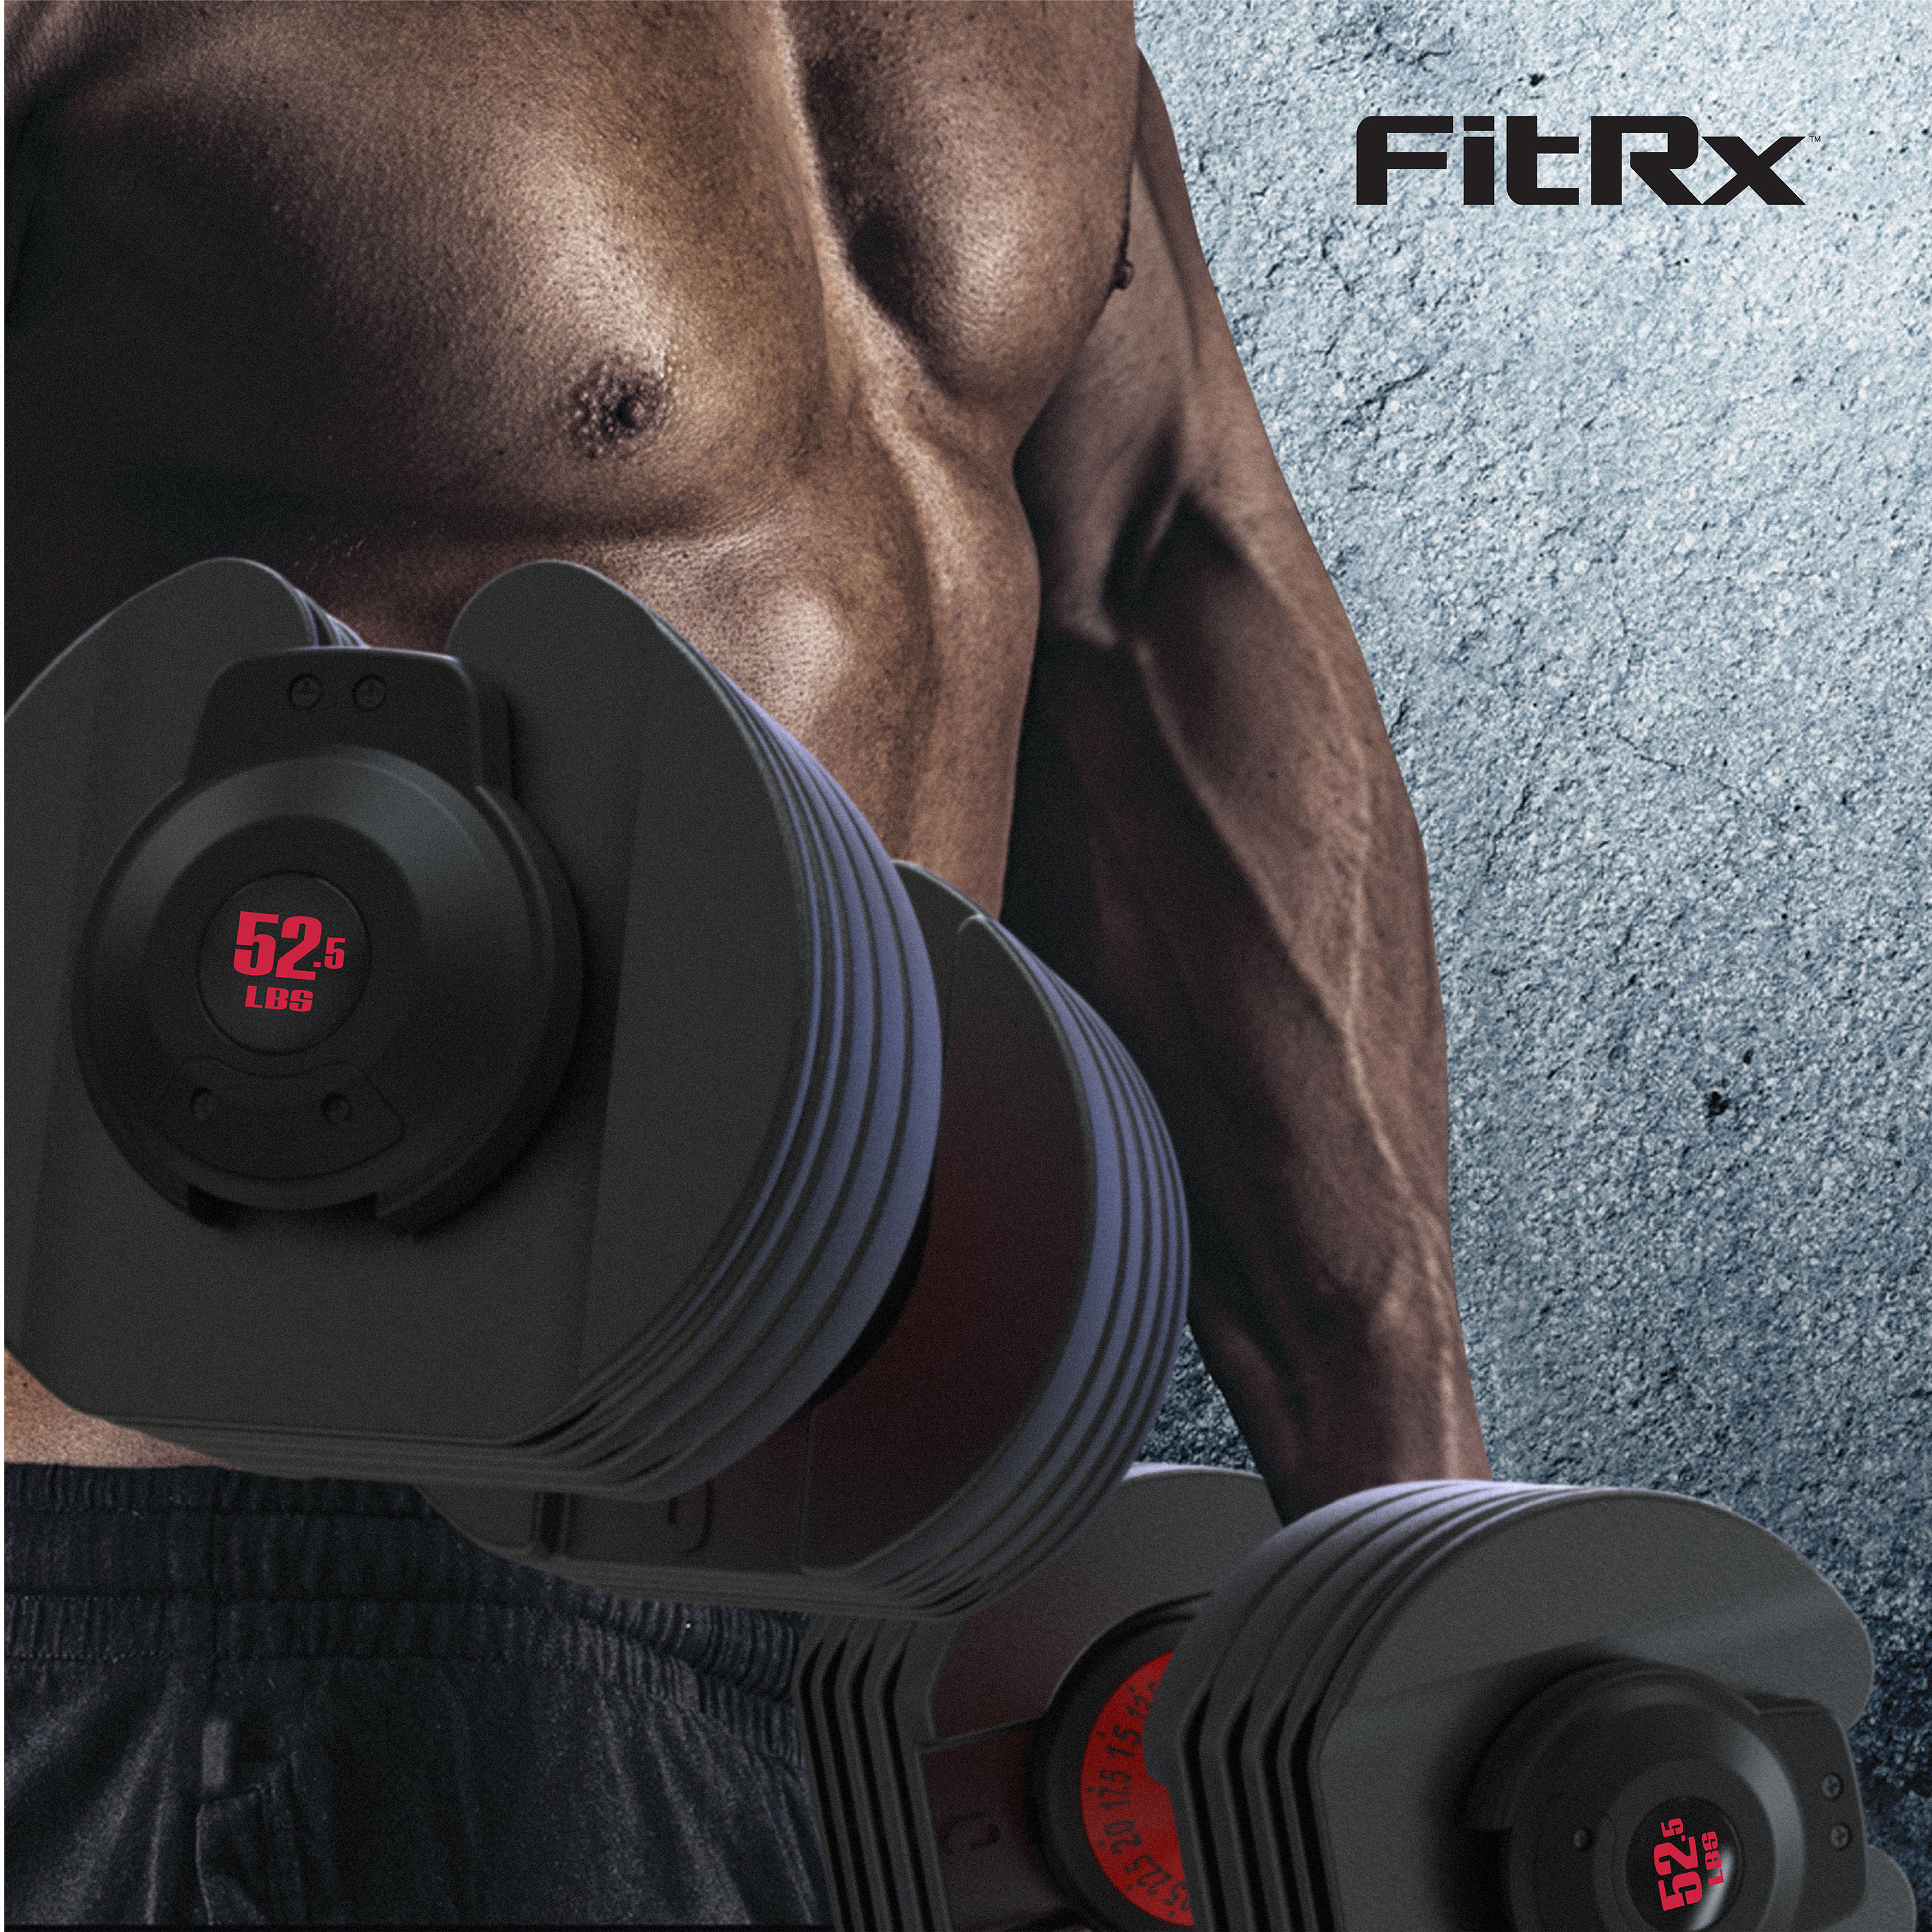 FitRx SmartBell, Quick-Select Adjustable Dumbbell, 5-52.5 lbs. Weight, Black, Single - image 11 of 12